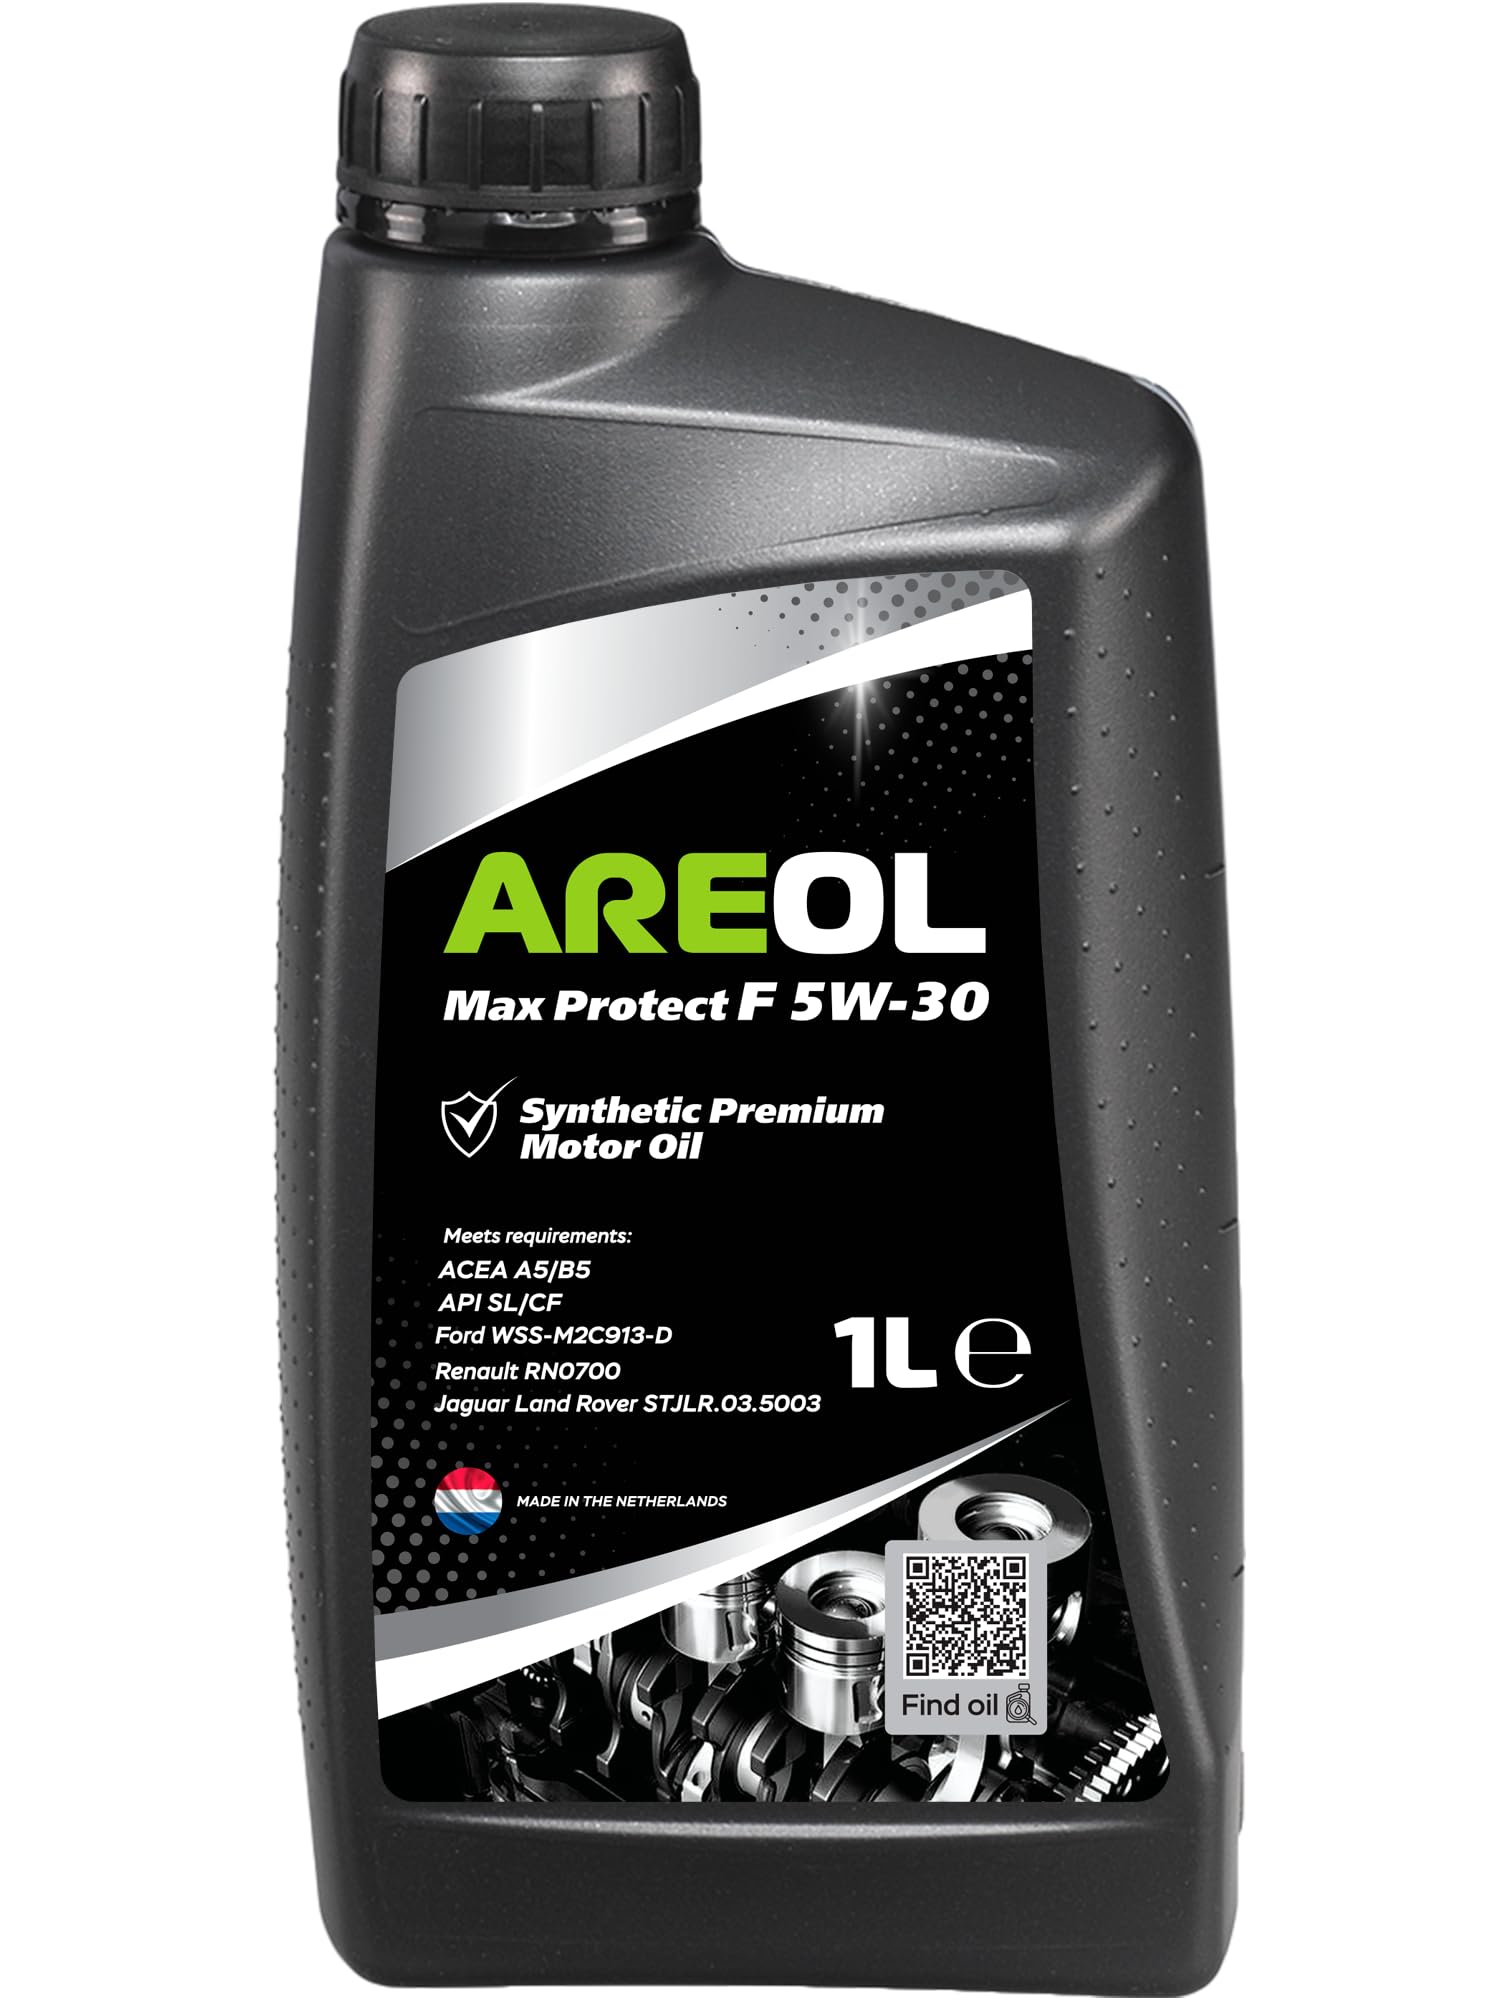 AREOL Max Protect F 5W-30 Motoröl, 1 Liter von AREOL